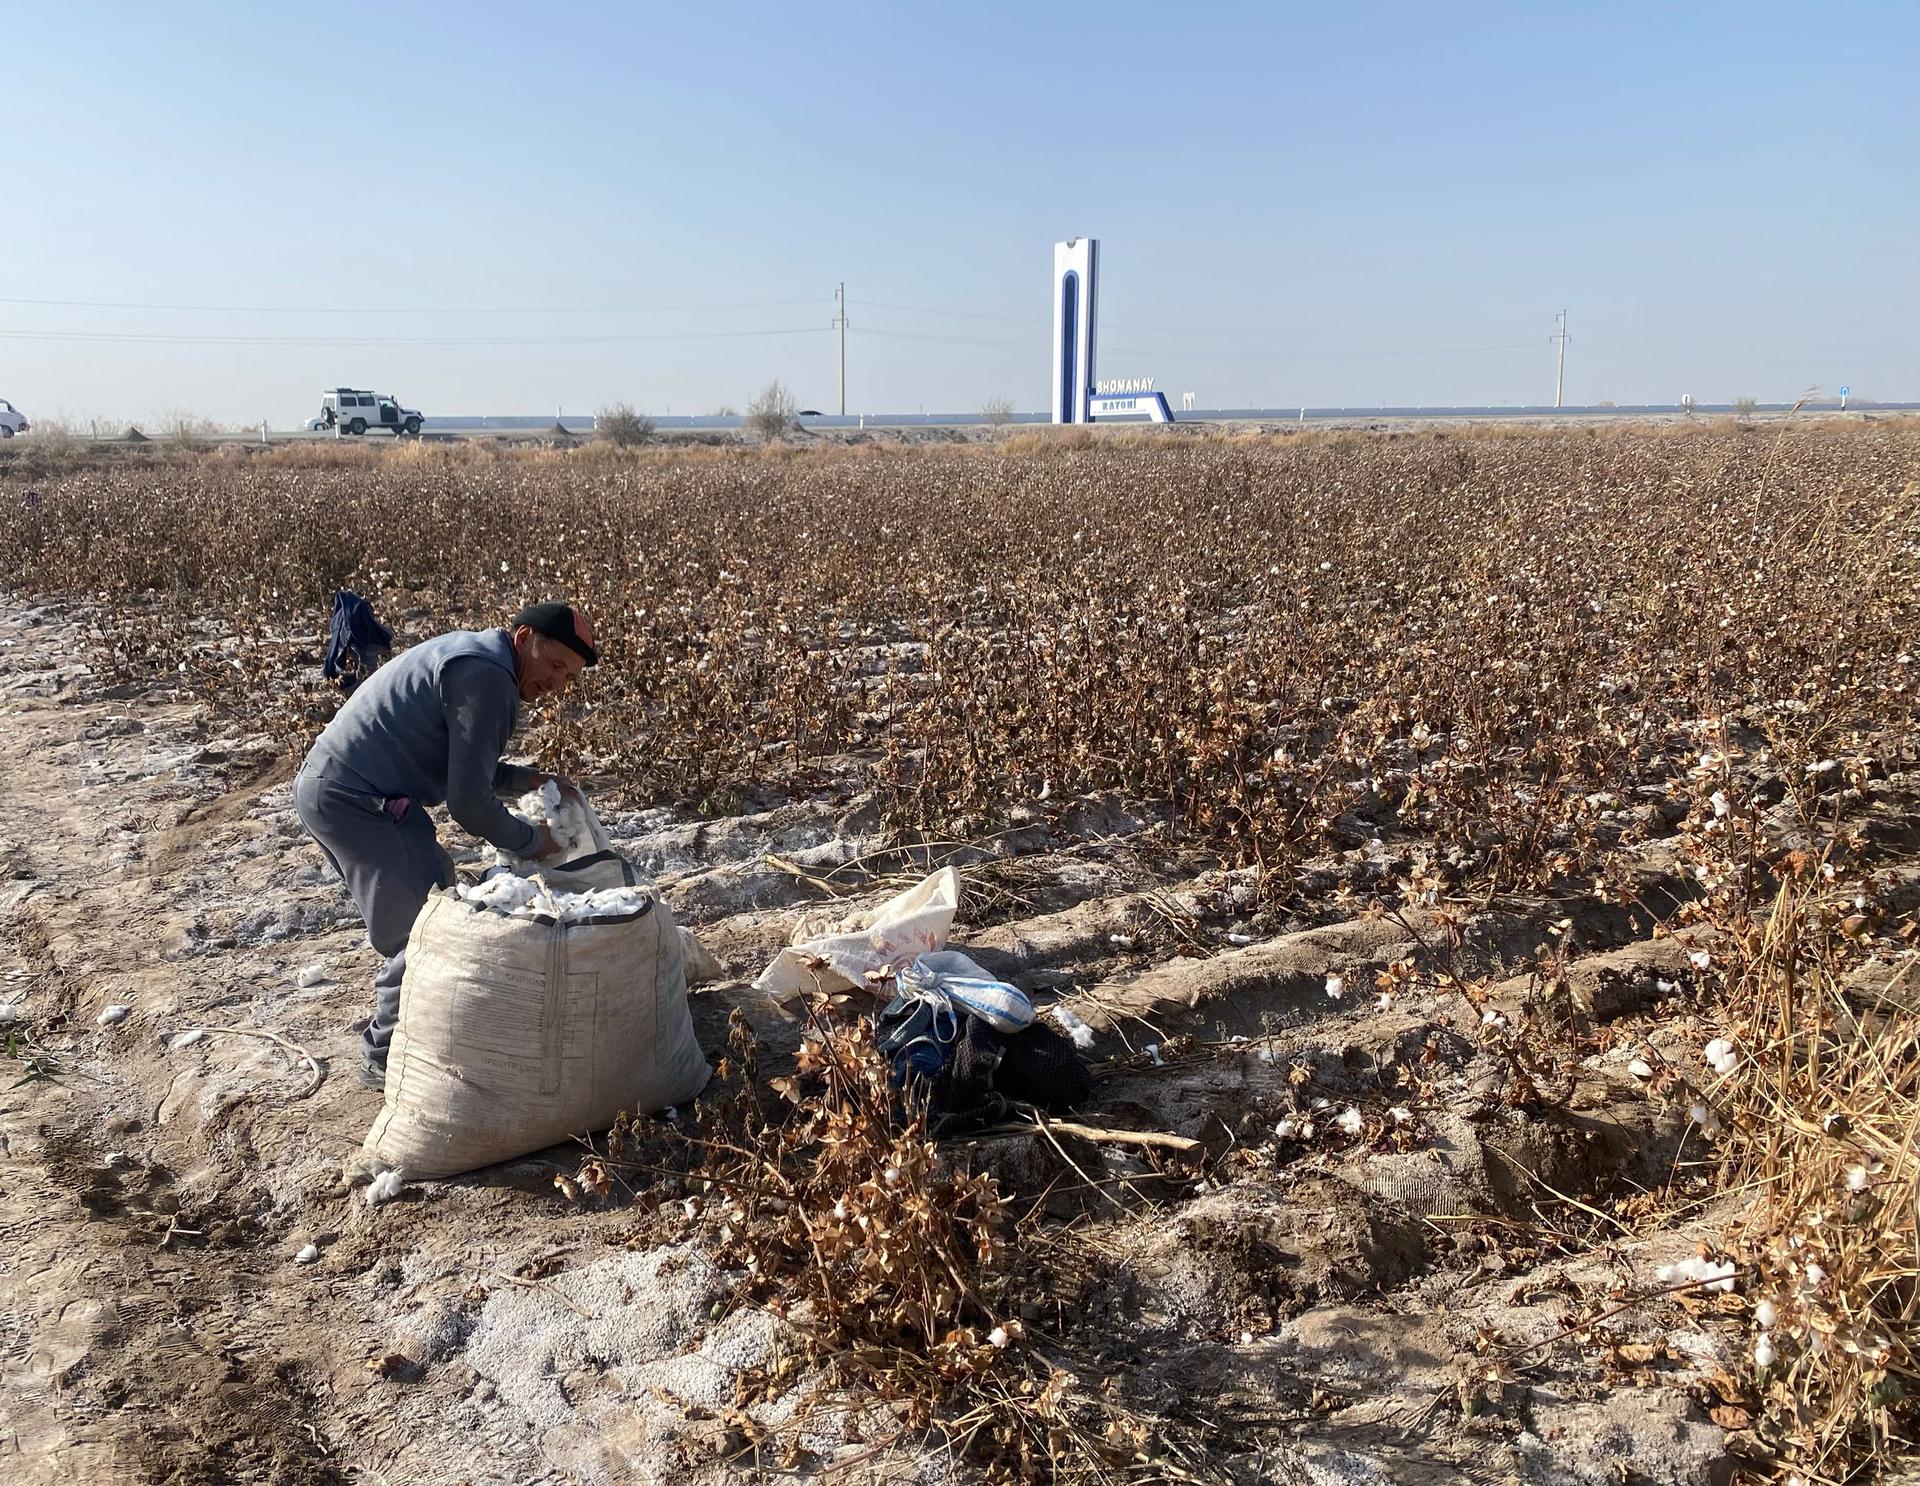 A worker in western Uzbekistan finishes picking a row of cotton.